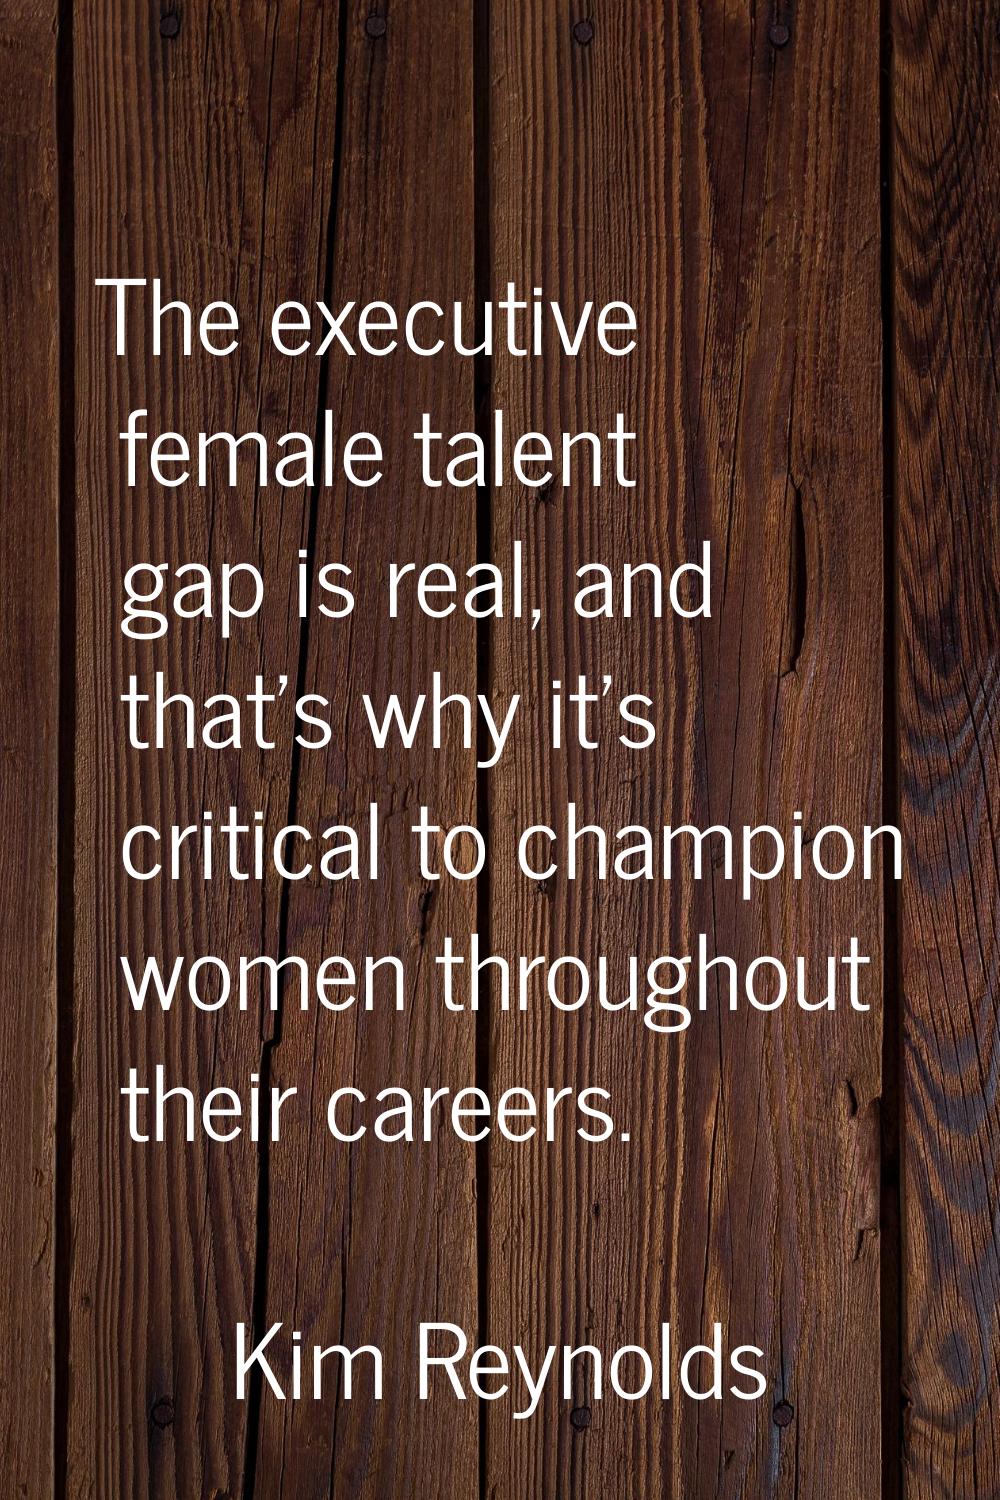 The executive female talent gap is real, and that's why it's critical to champion women throughout 